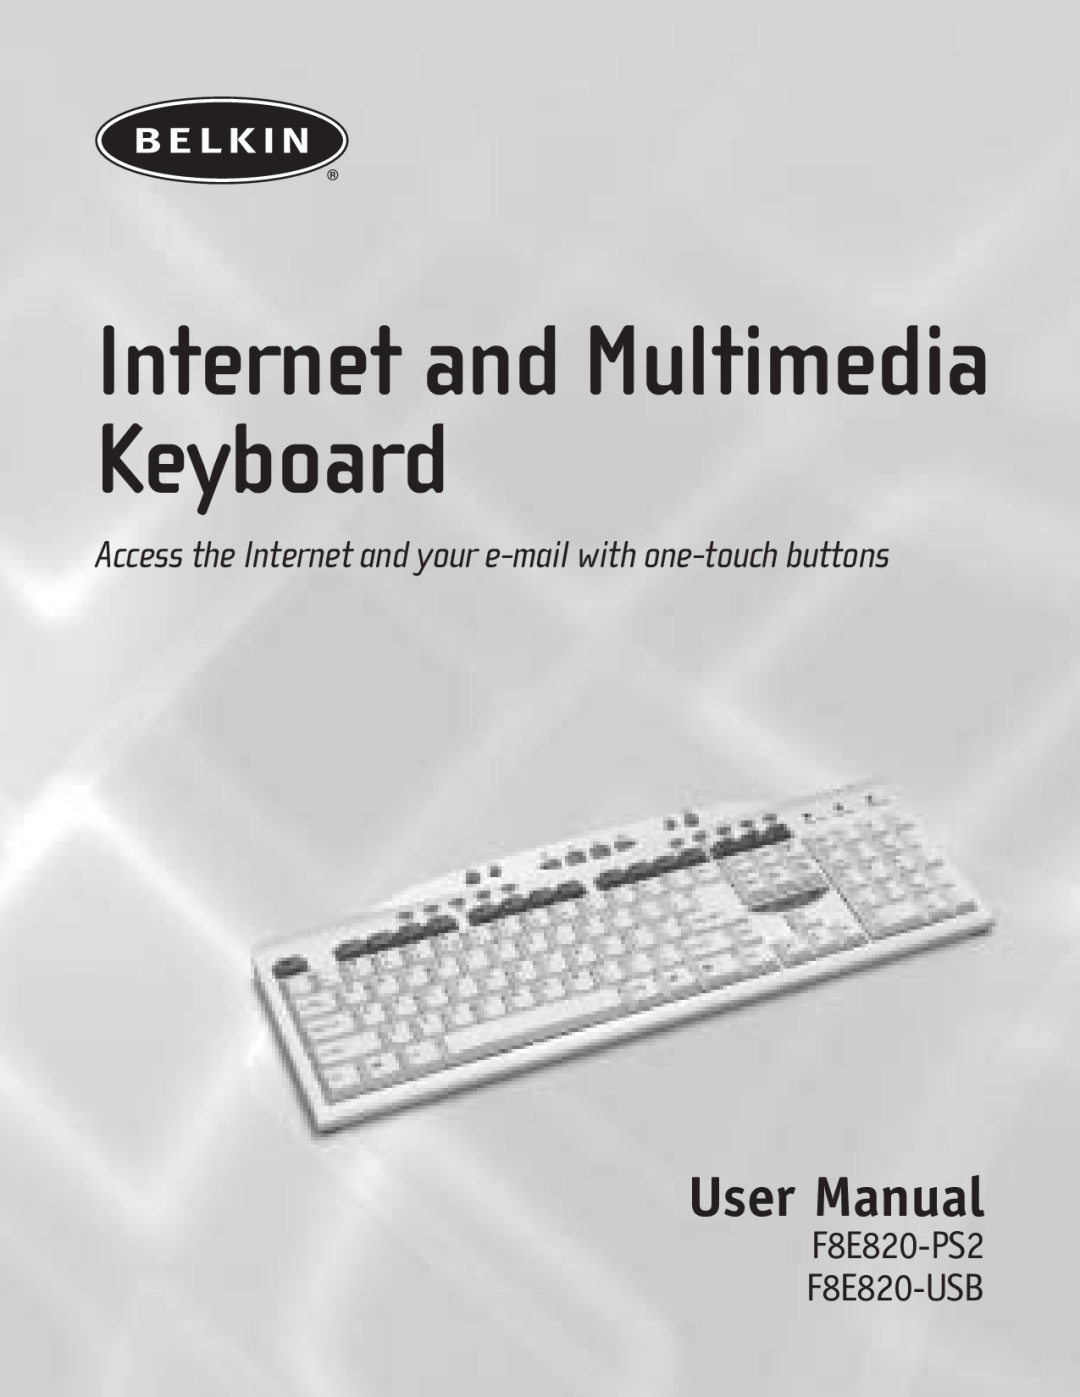 Belkin F8E820-PS2 user manual Internet and Multimedia Keyboard, Access the Internet and your e-mail with one-touch buttons 